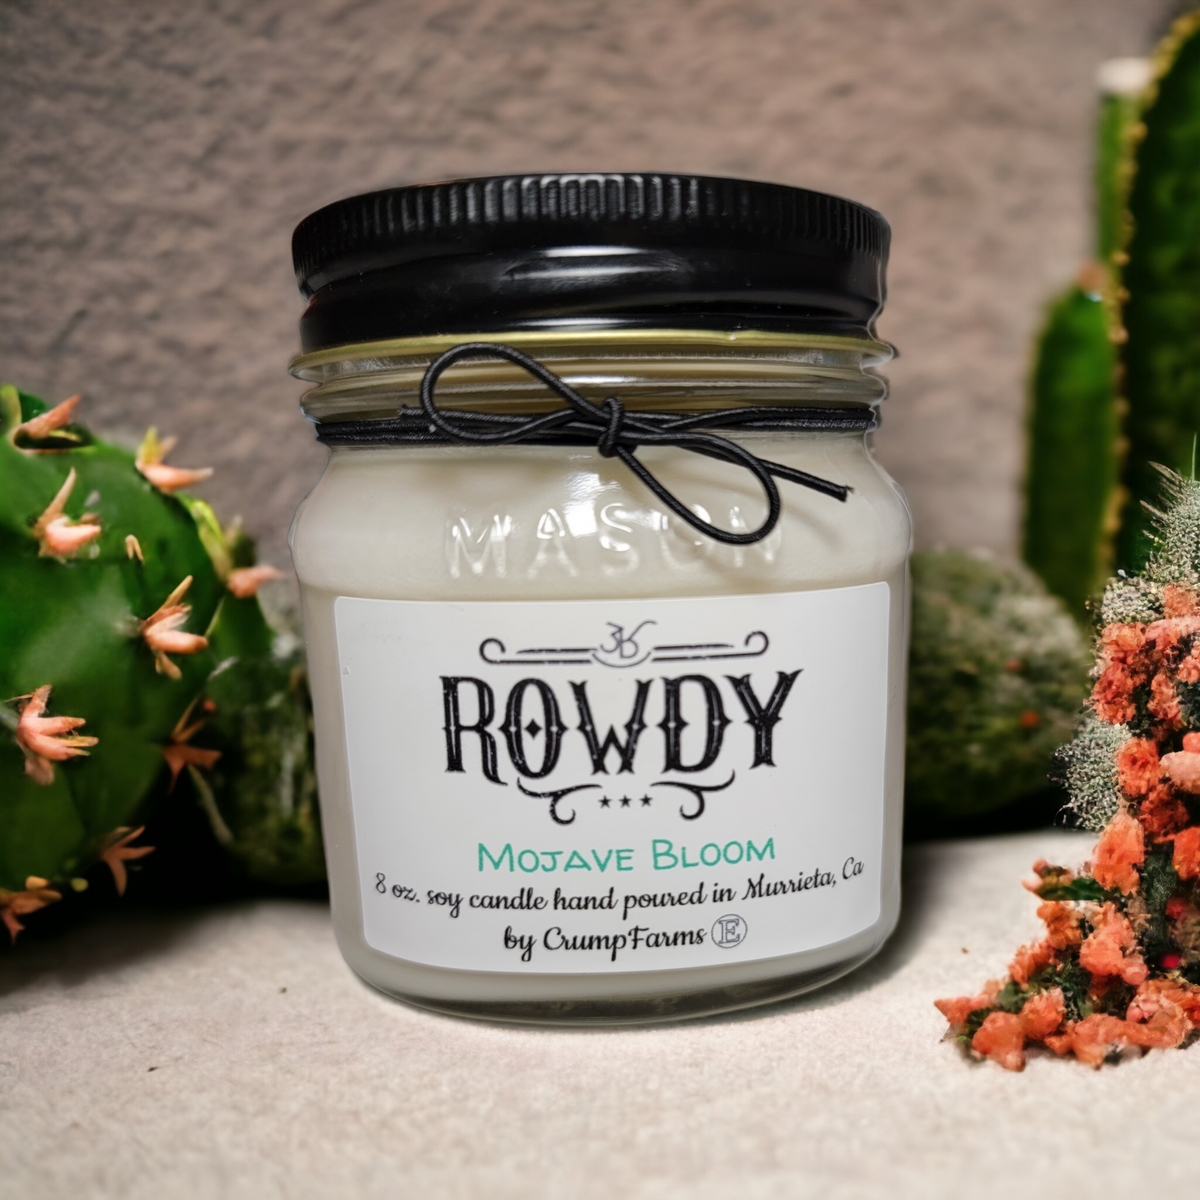 Mojave Bloom candle